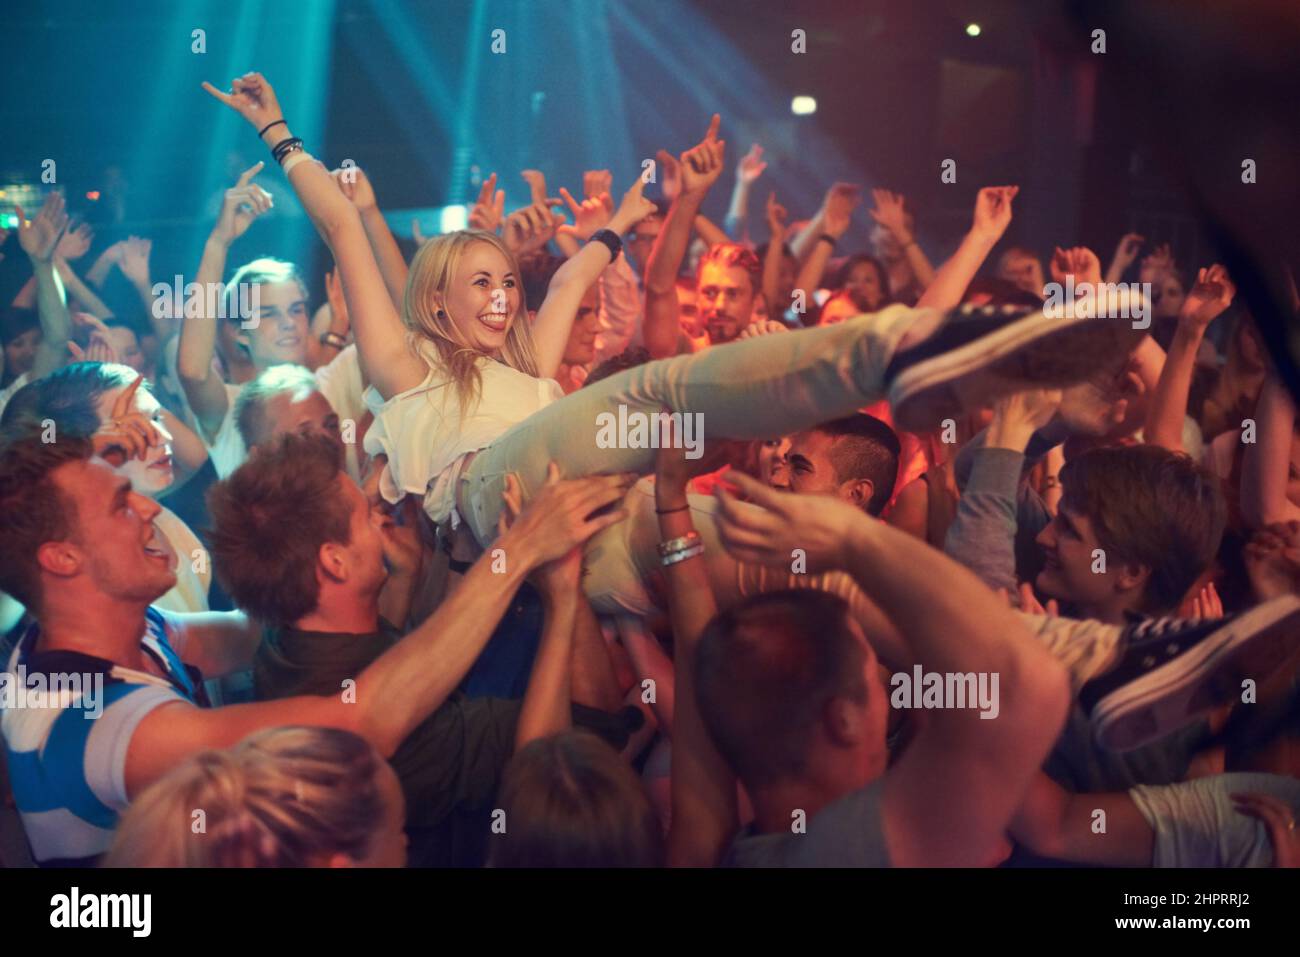 Own the night. Cropped shot of a woman crowd surfing at a music festival. Stock Photo